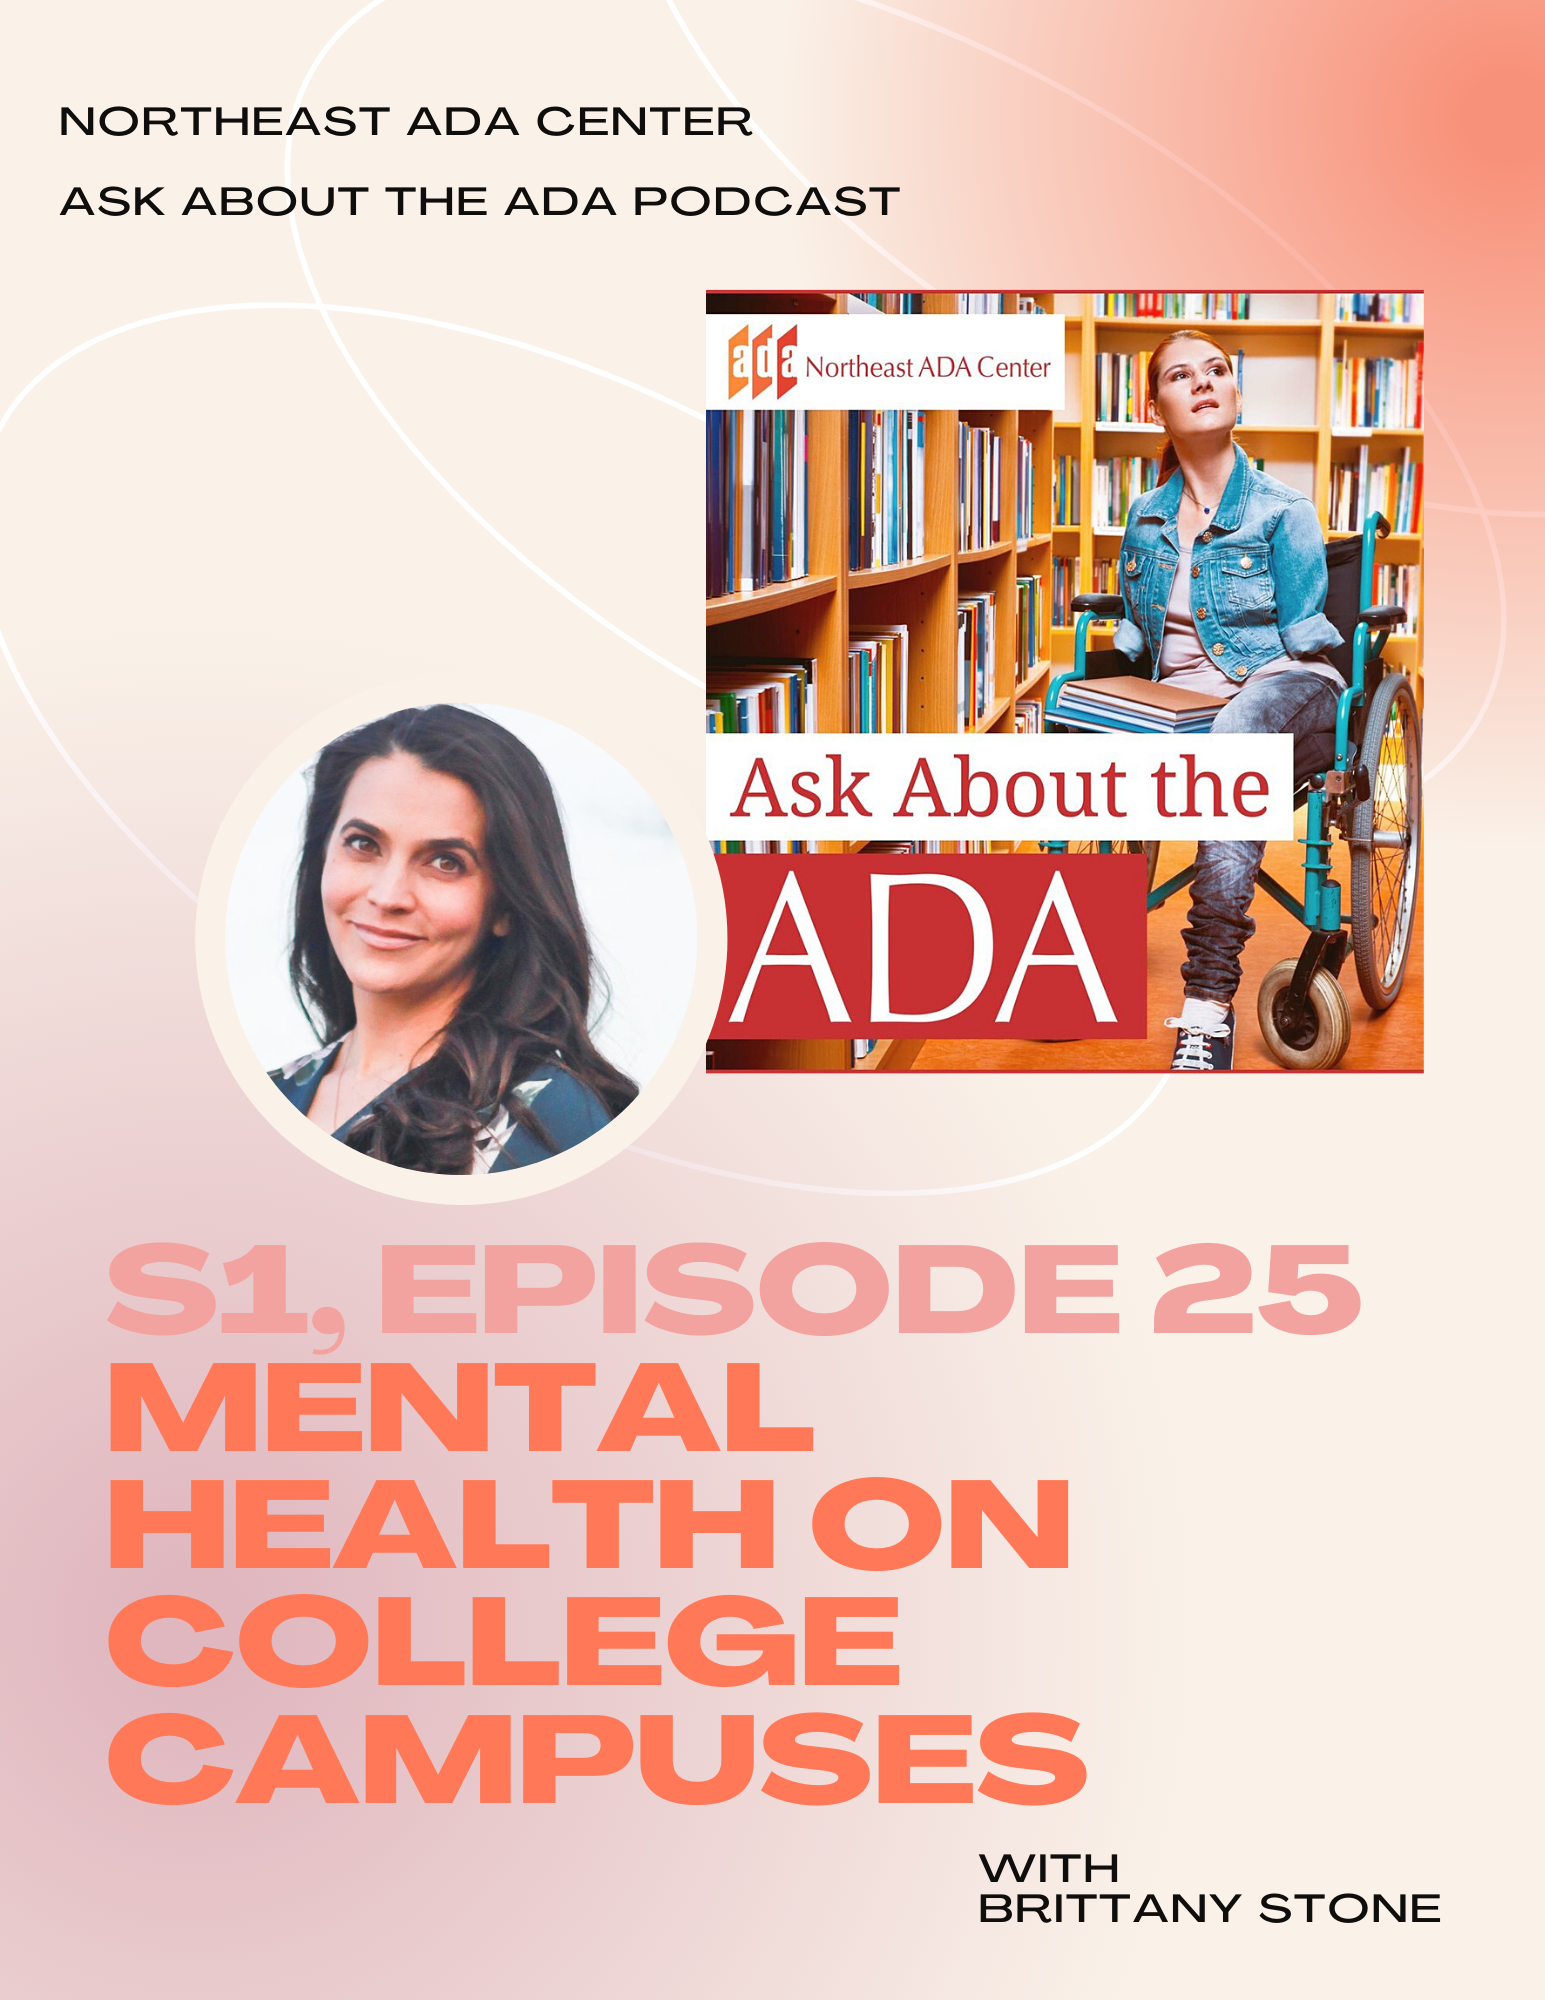 Image of the Ask About the ADA podcast, which shows a woman in a wheelchair sitting between two bookshelves. There is also an image of Brittany Stone, a guest on this episode of the podcast.